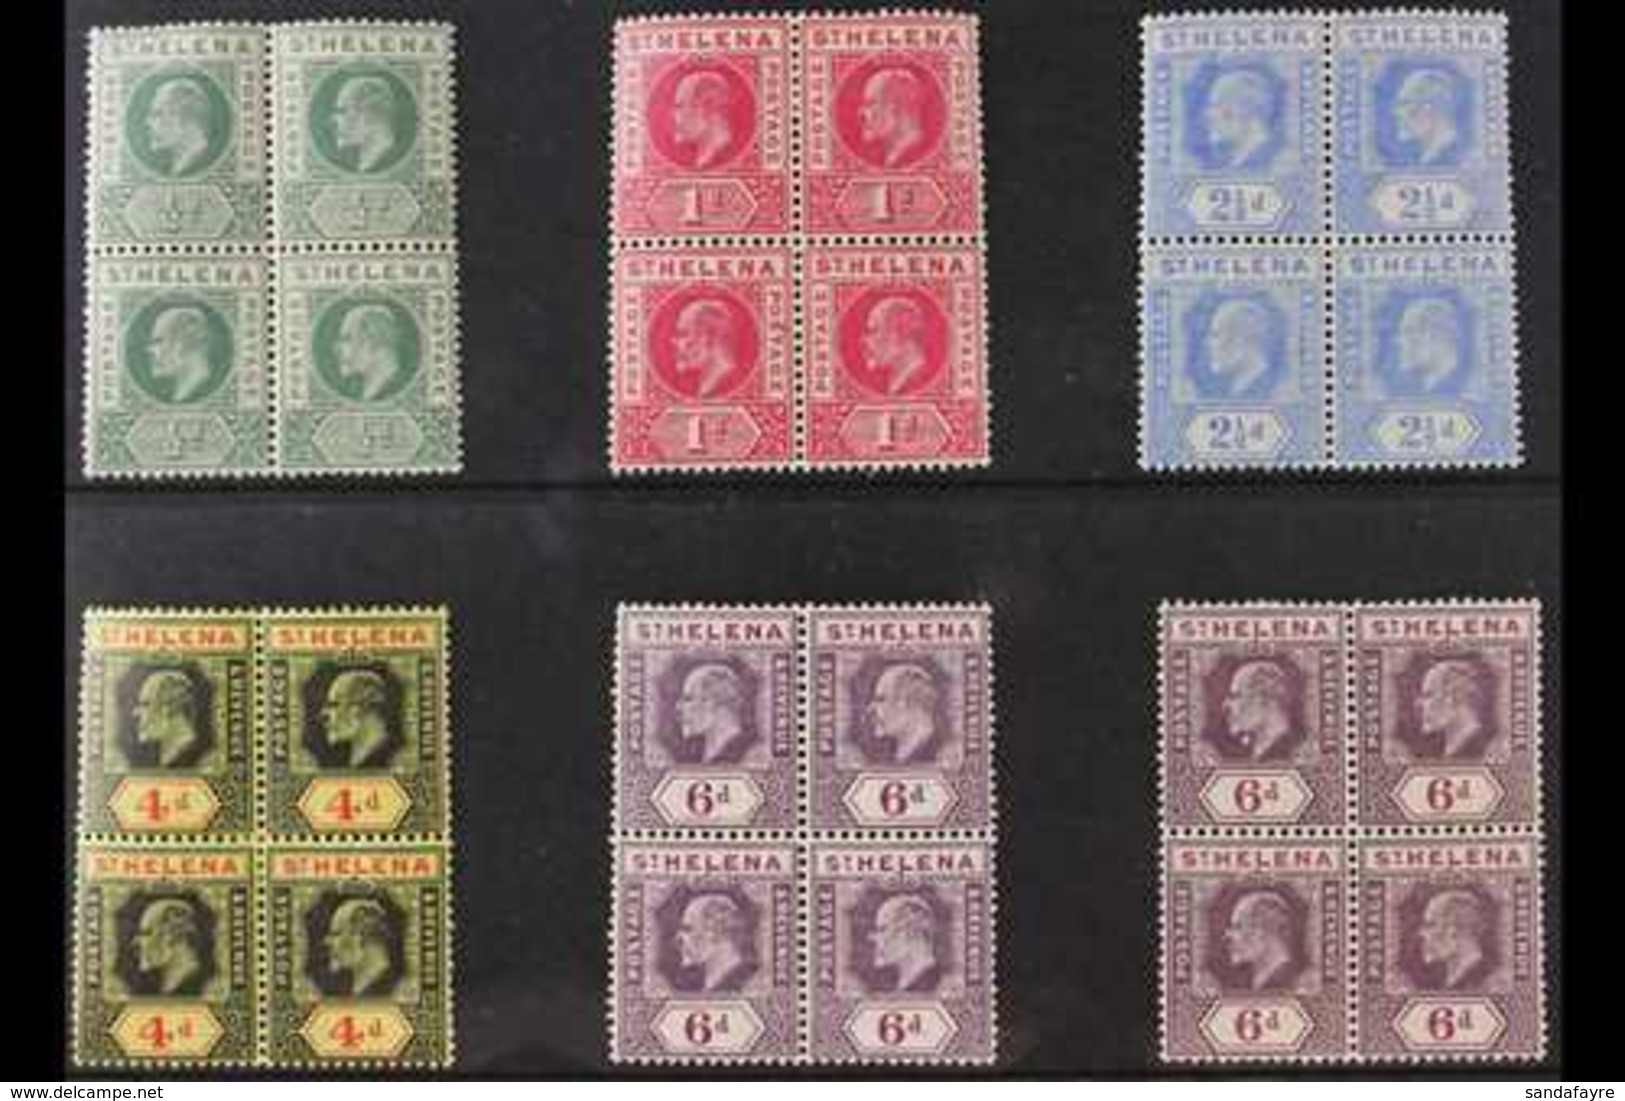 1902-11 BLOCKS OF 4. A Delightful Group Presented On A Stock Card That Includes The 1902 Set With ½d Green & 1d Carmine, - St. Helena